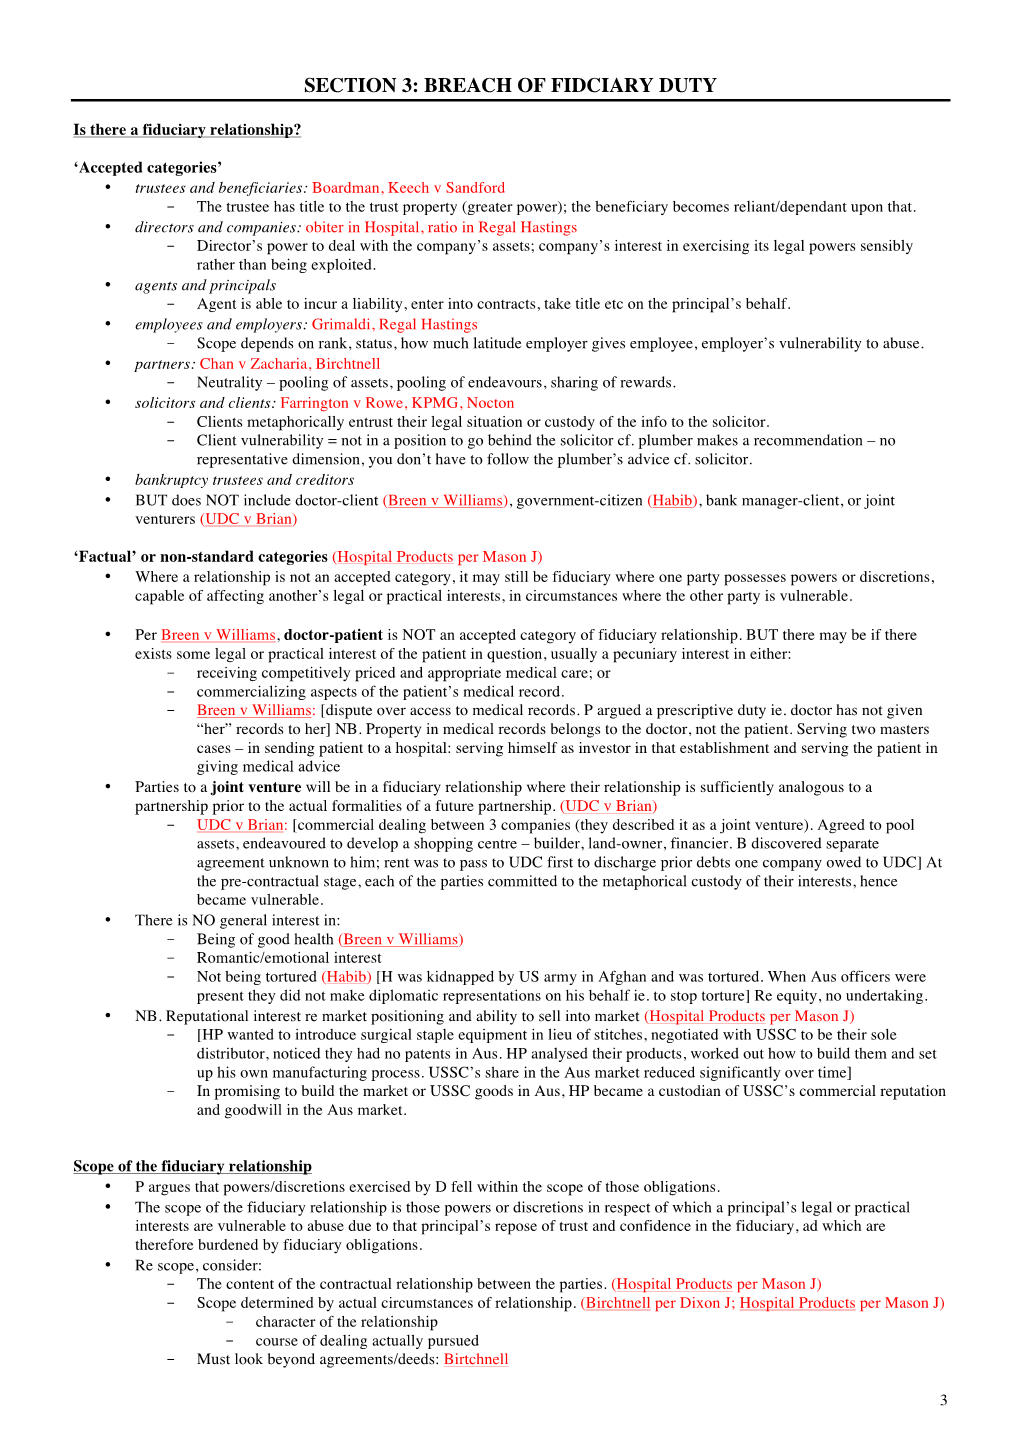 Law3111 Condensed Equity Exam Notes